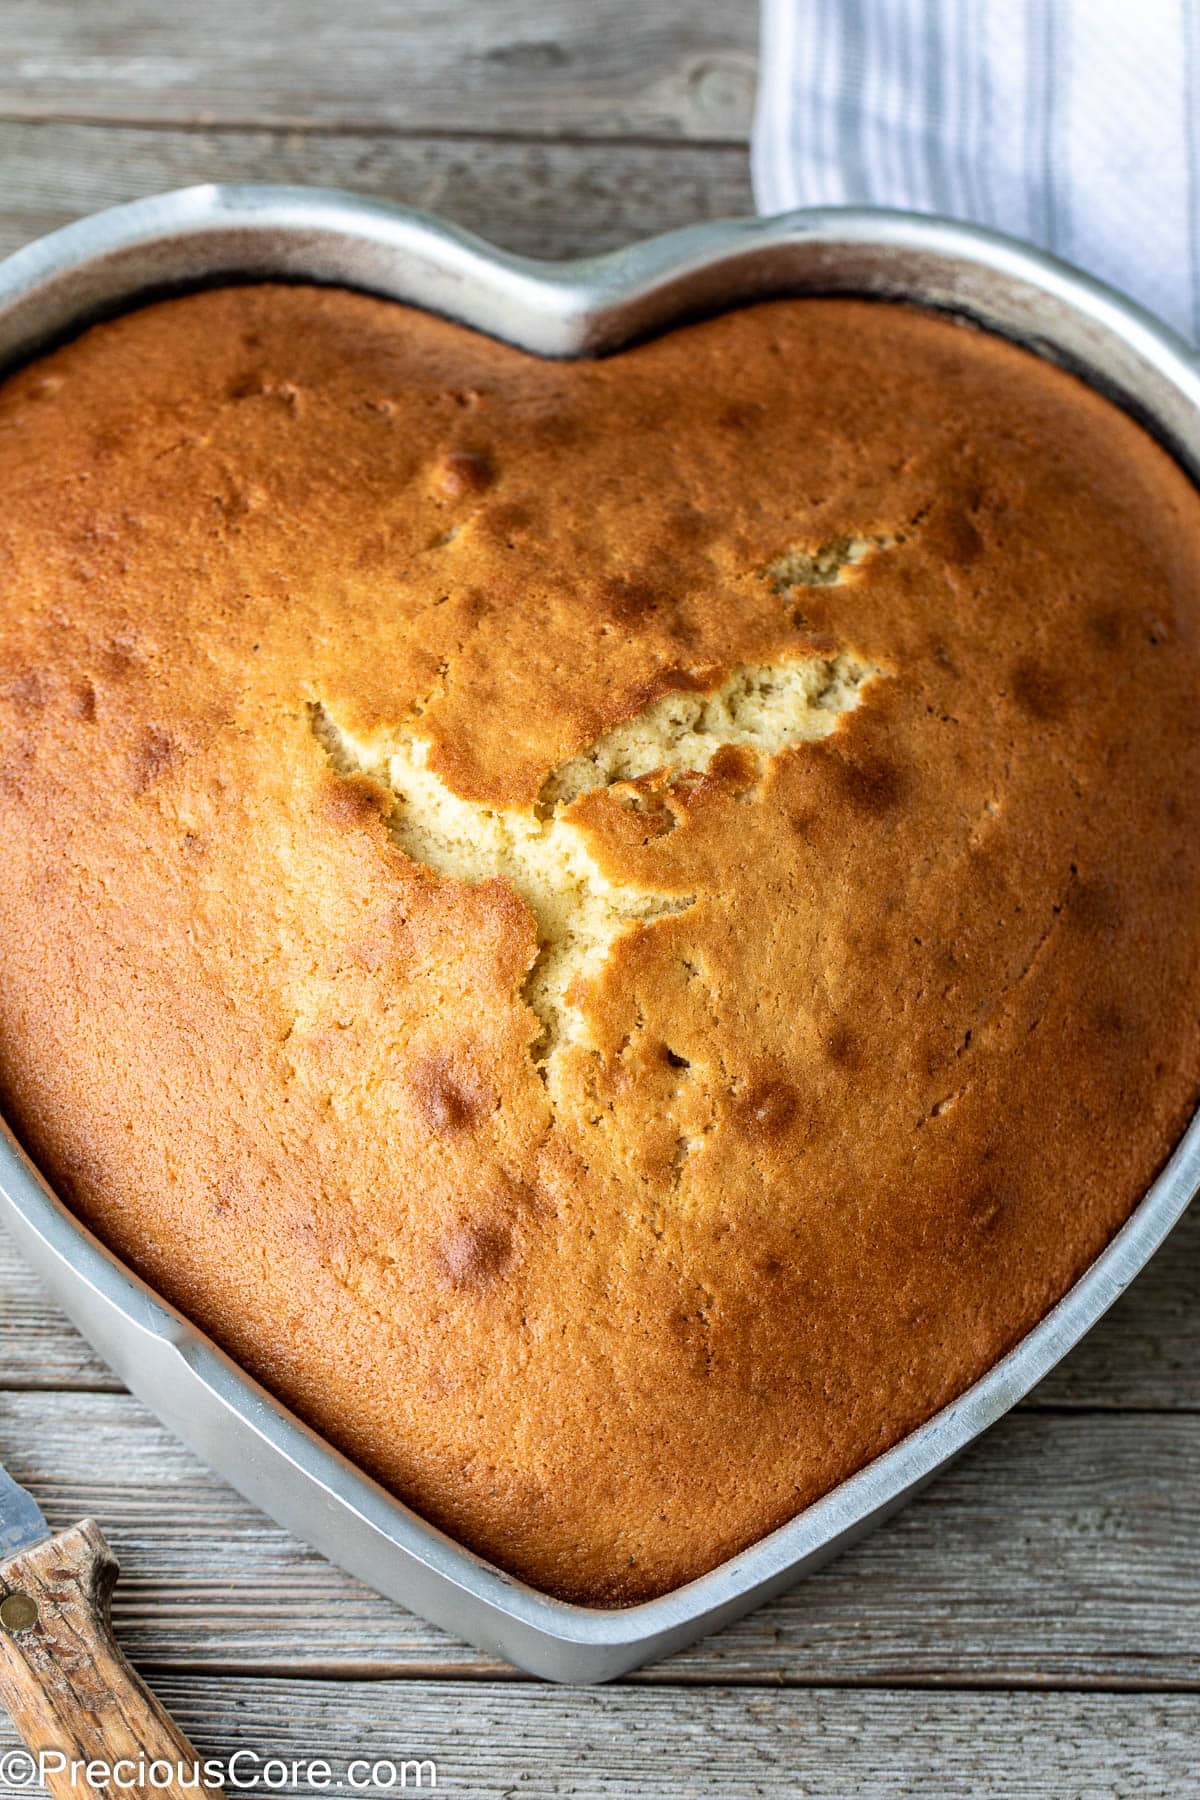 Heart shaped plain cake in the pan.